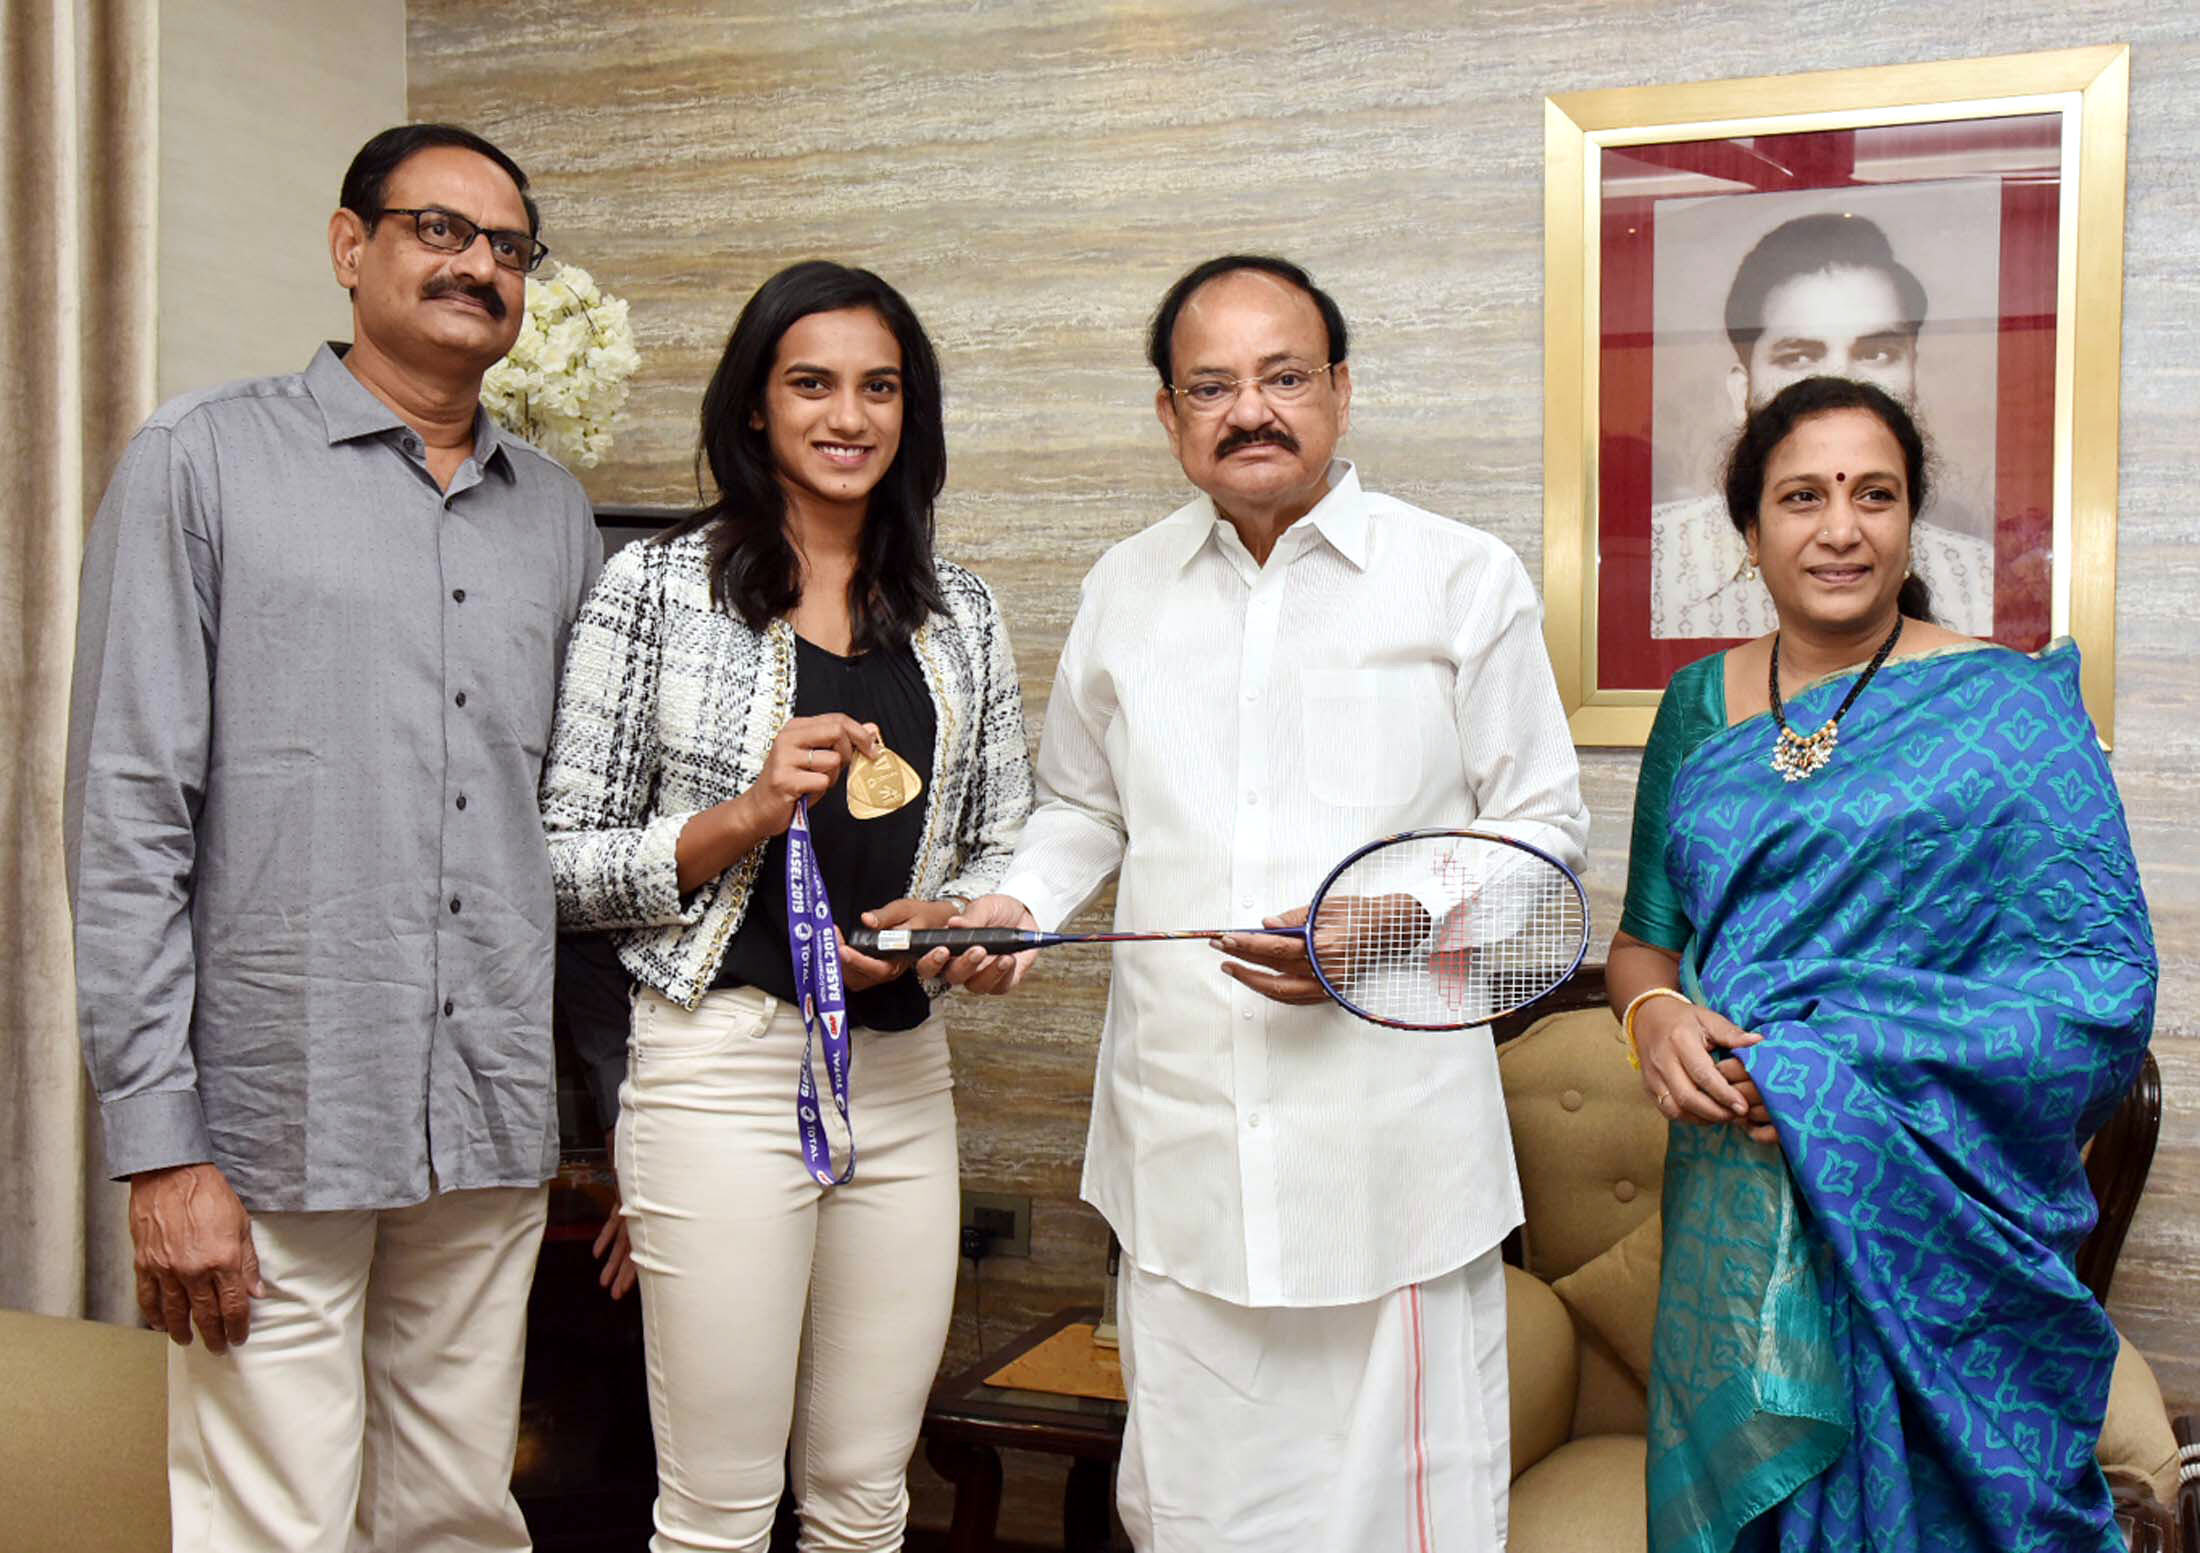 The World Badminton Champion, Ms. P.V. Sindhu along with her parents calling on the Vice President, M. Venkaiah Naidu, in Hyderabad on August 31, 2019.